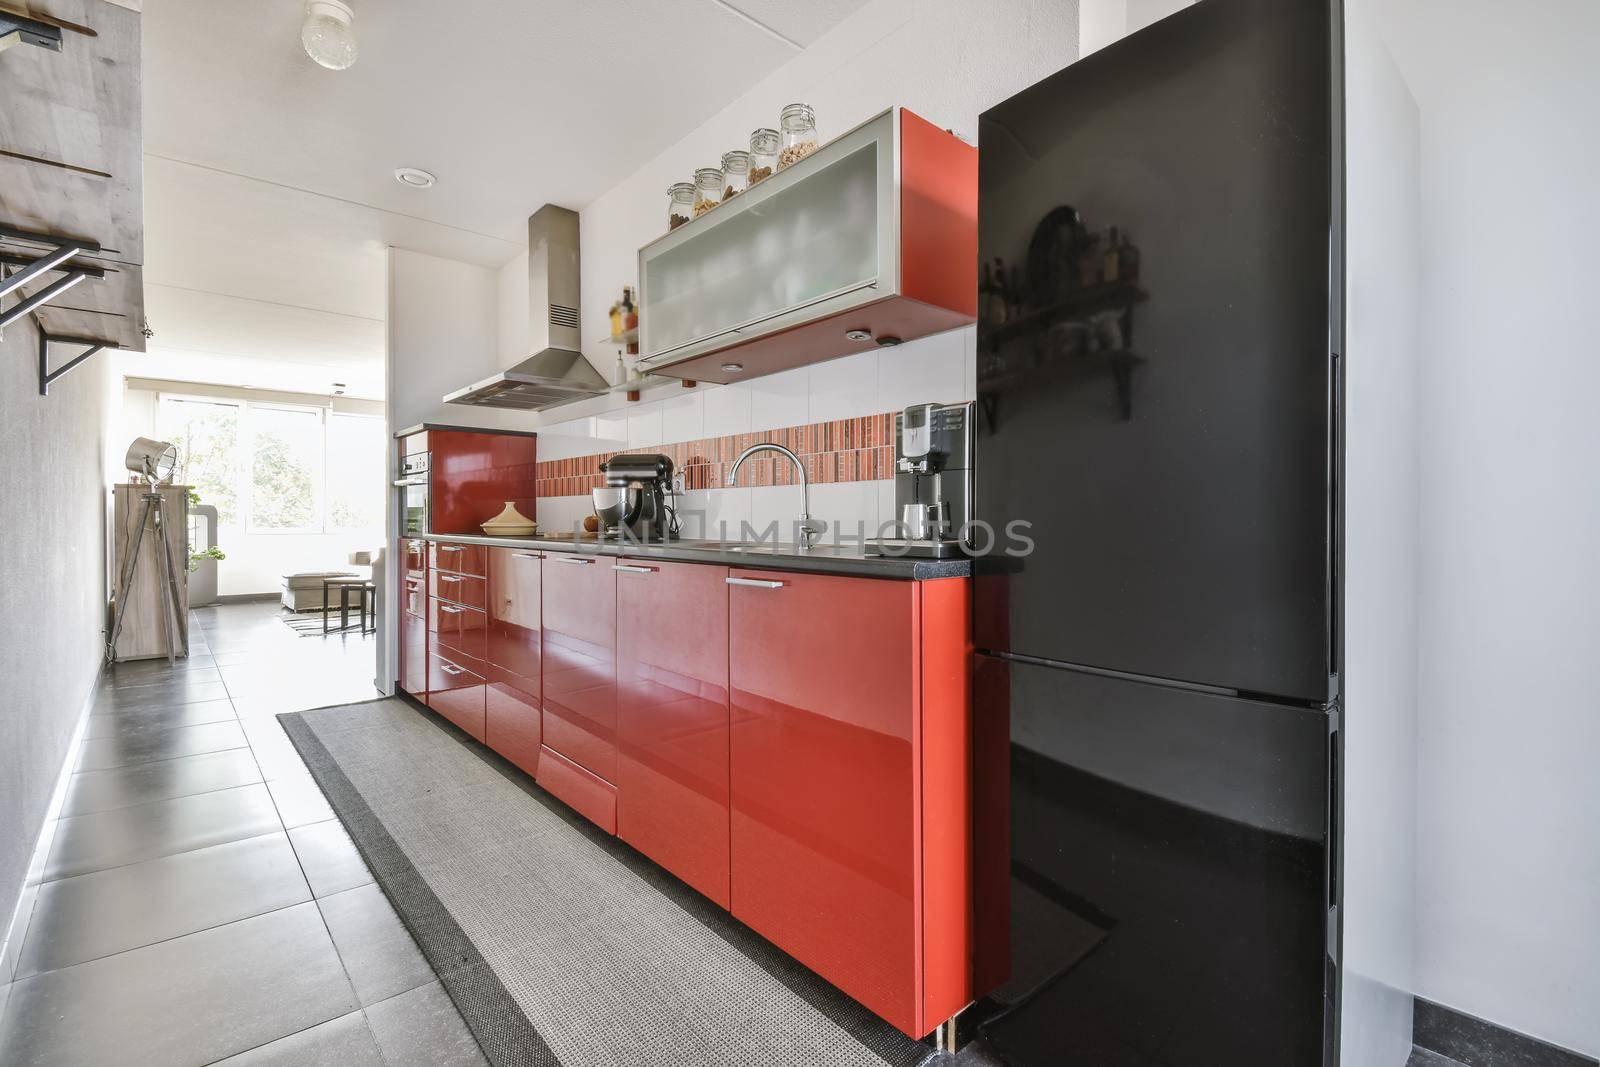 Stylish kitchen with red and black kitchen set